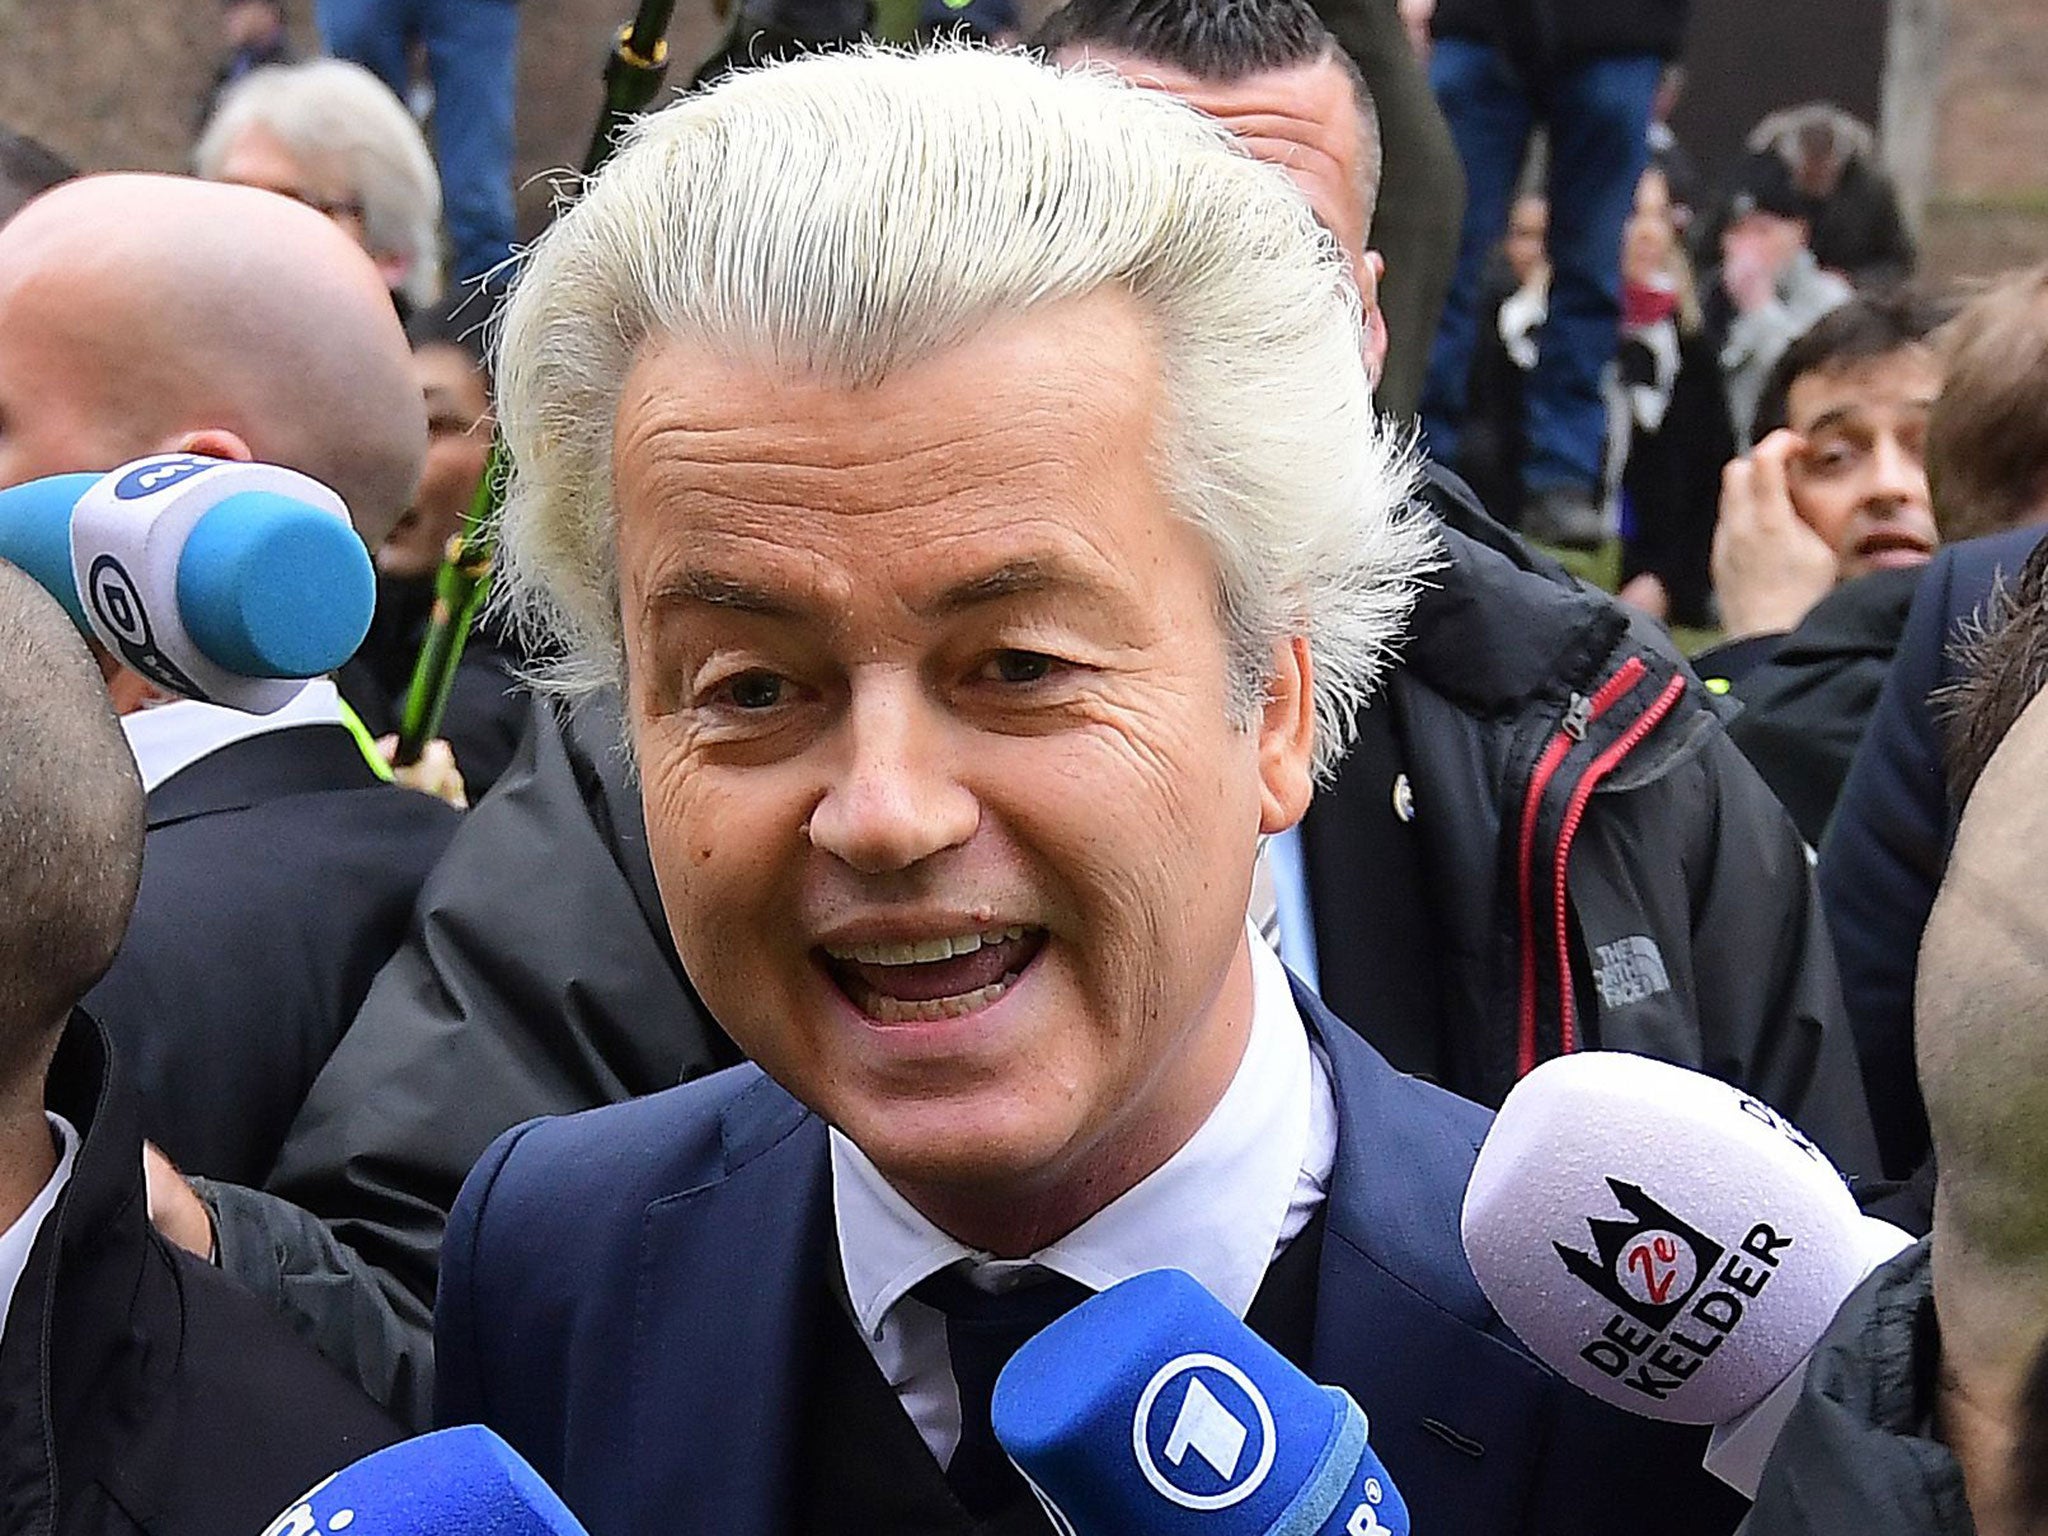 Geert Wilders launched the Party for Freedom's parliamentary election campaign in Spijkenisse, the Netherlands, on Saturday